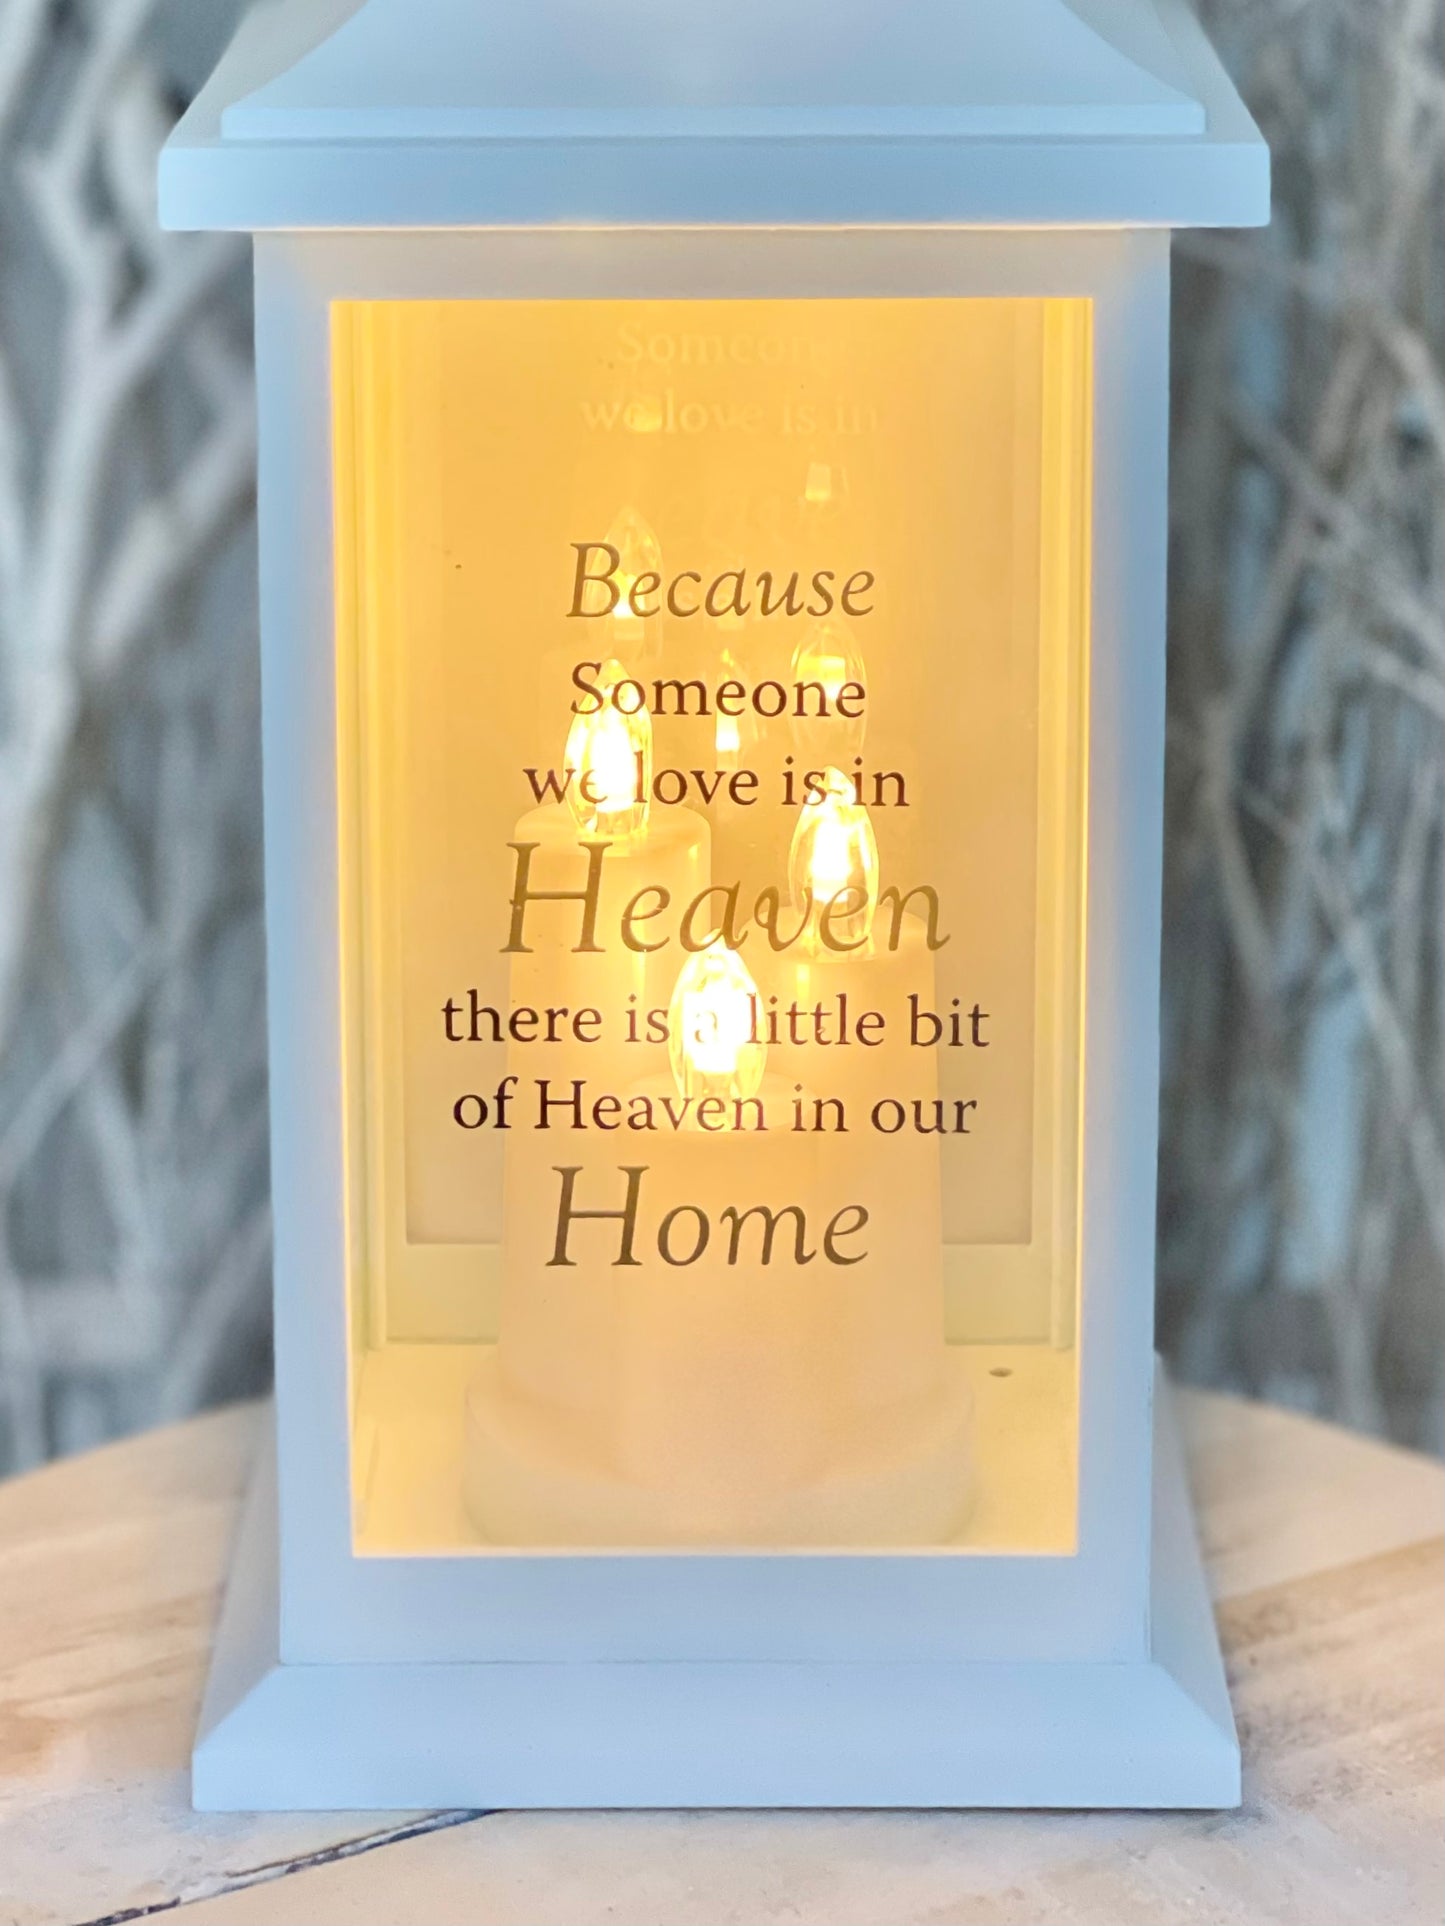 "Light Of Our Loved Ones" Lantern - Someone We Love is in Heaven